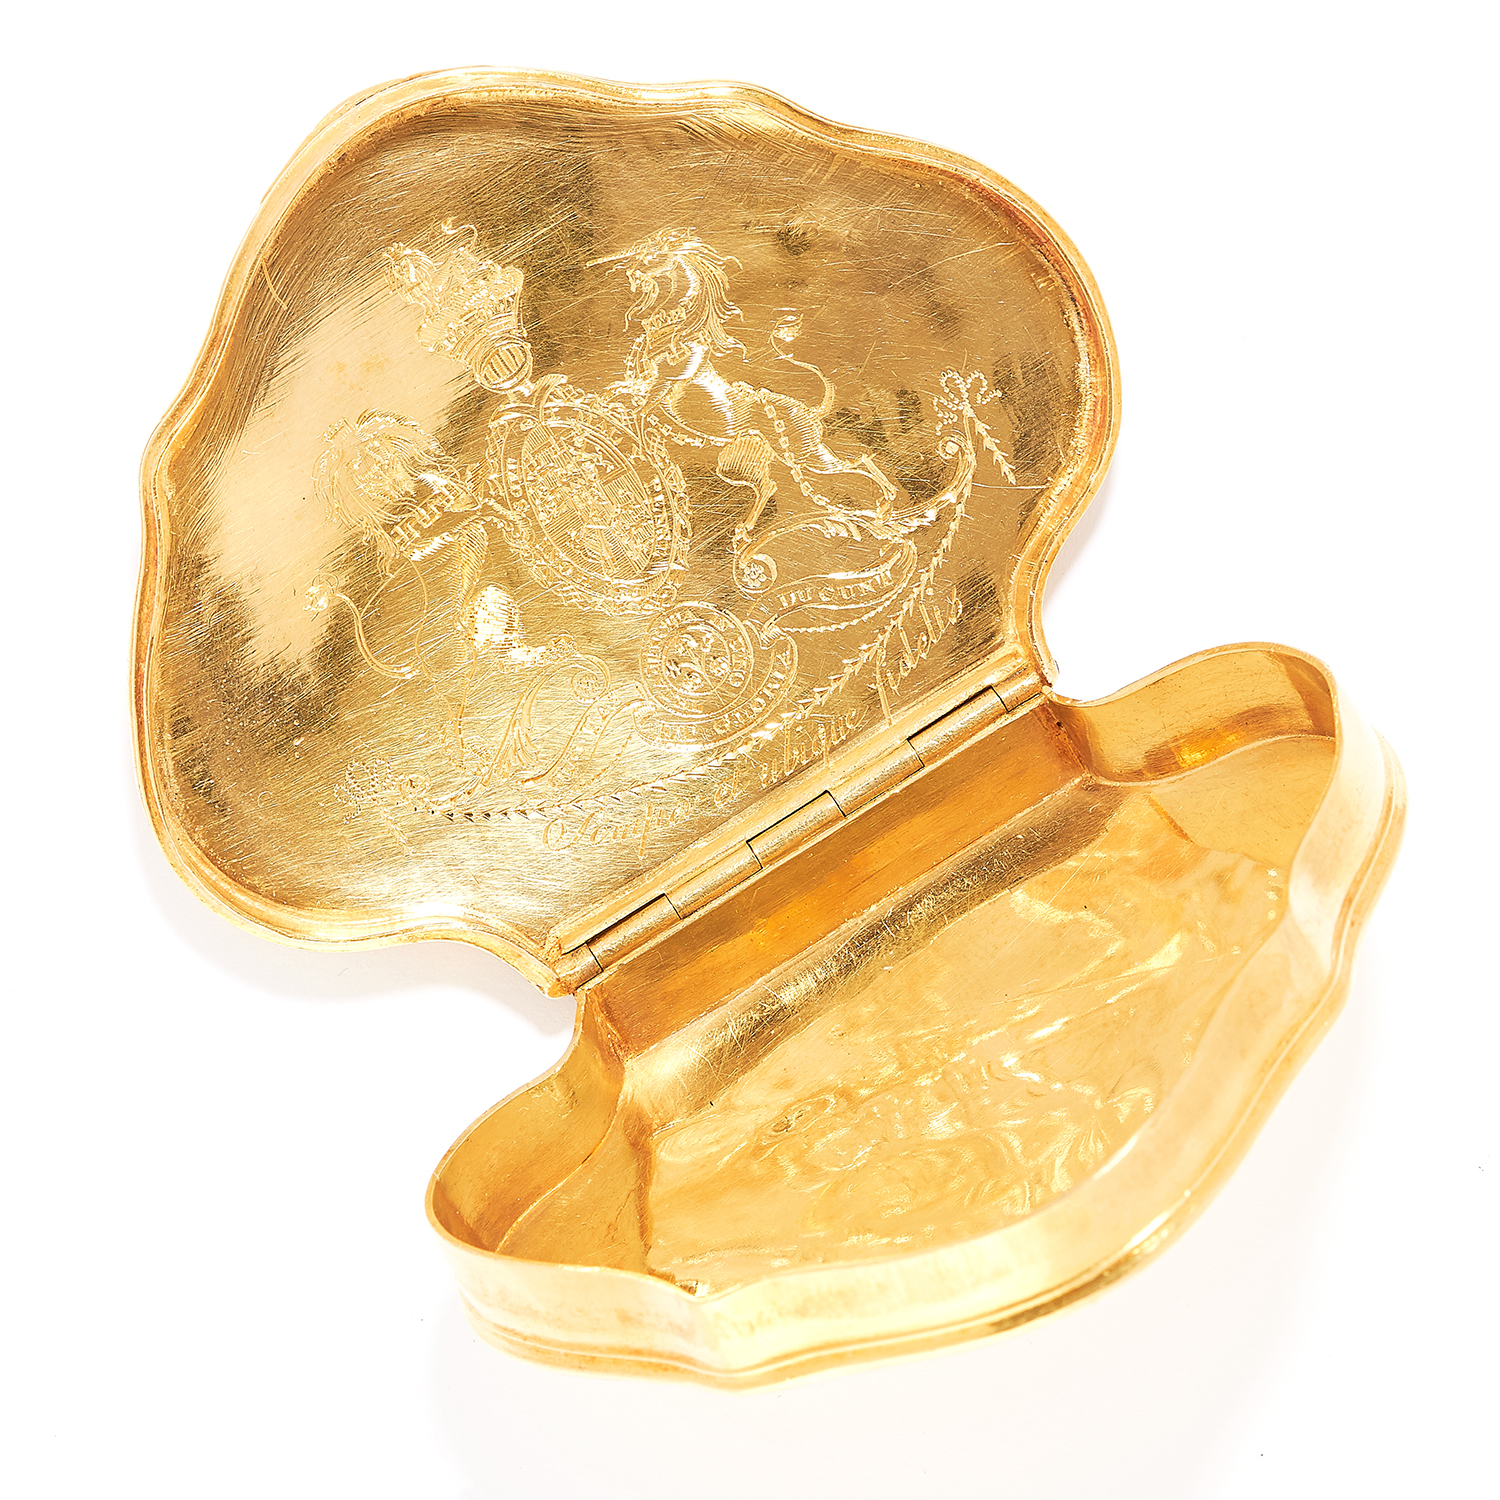 ANTIQUE GOLD REGIMENTAL SNUFF BOX, CIRCA 1750 in 18ct yellow gold, the lid is set with a scene of - Image 2 of 2